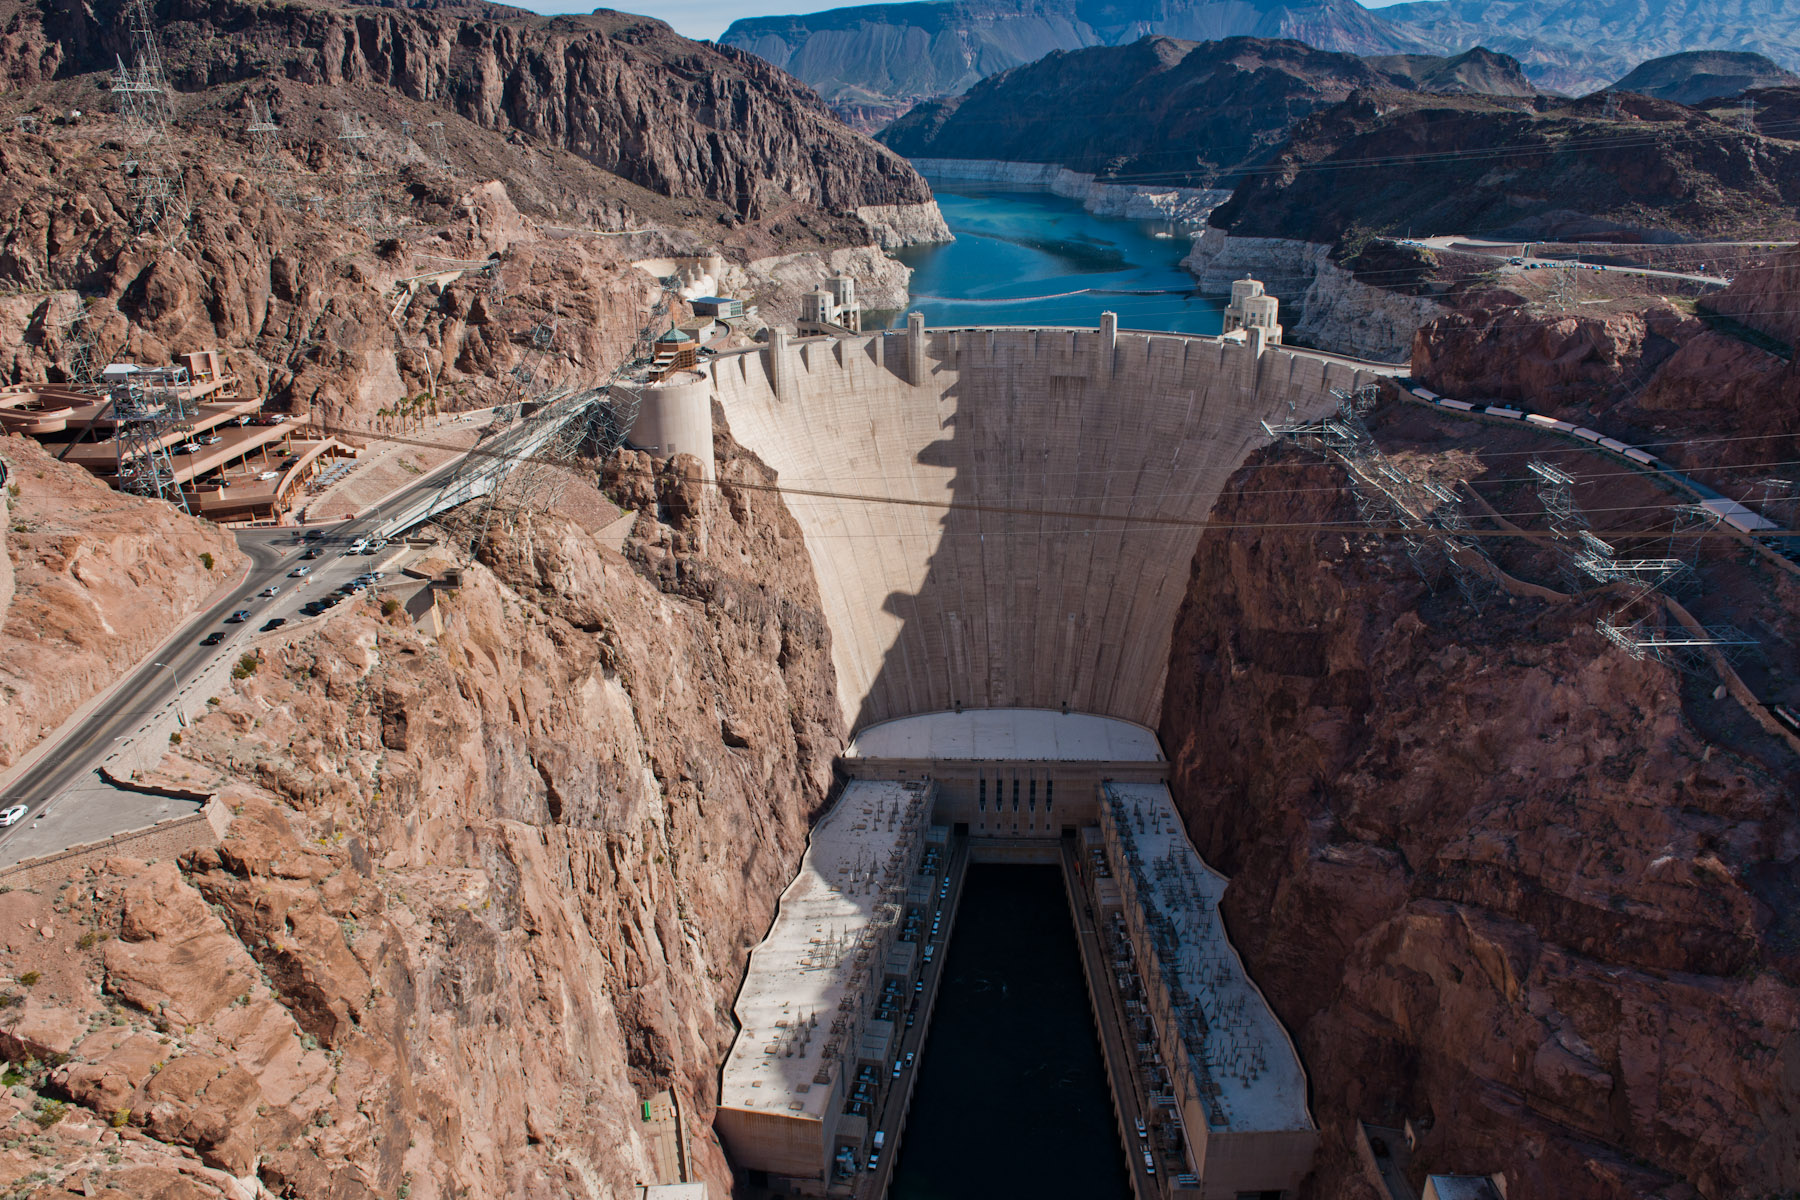 Hoover Dam on the Colorado River